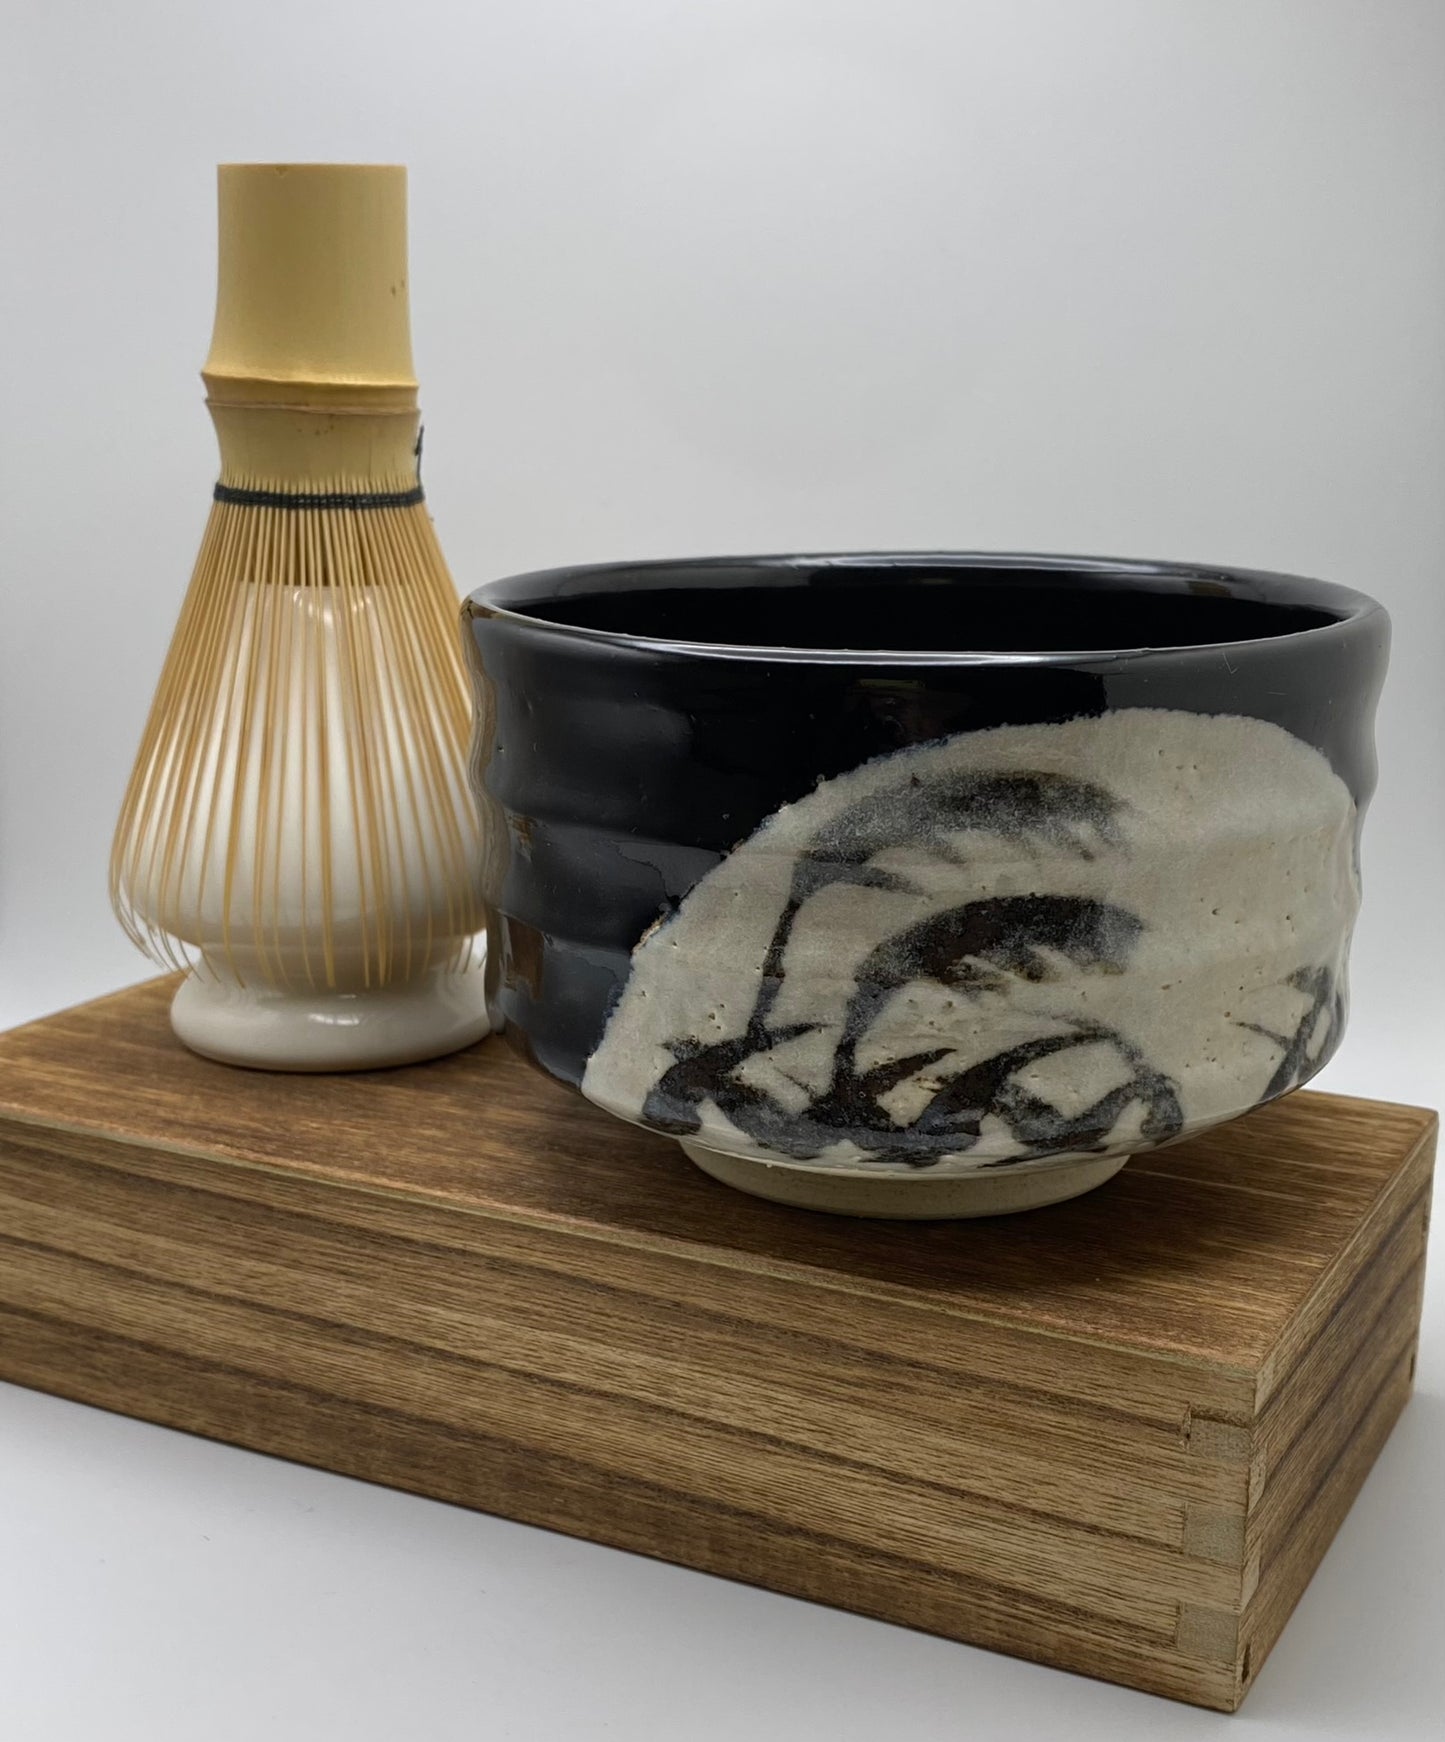 Black & White Glaze on White Clay Hand Painted Blowing Leaves Handmade Chawan Matcha Bowl (Large)